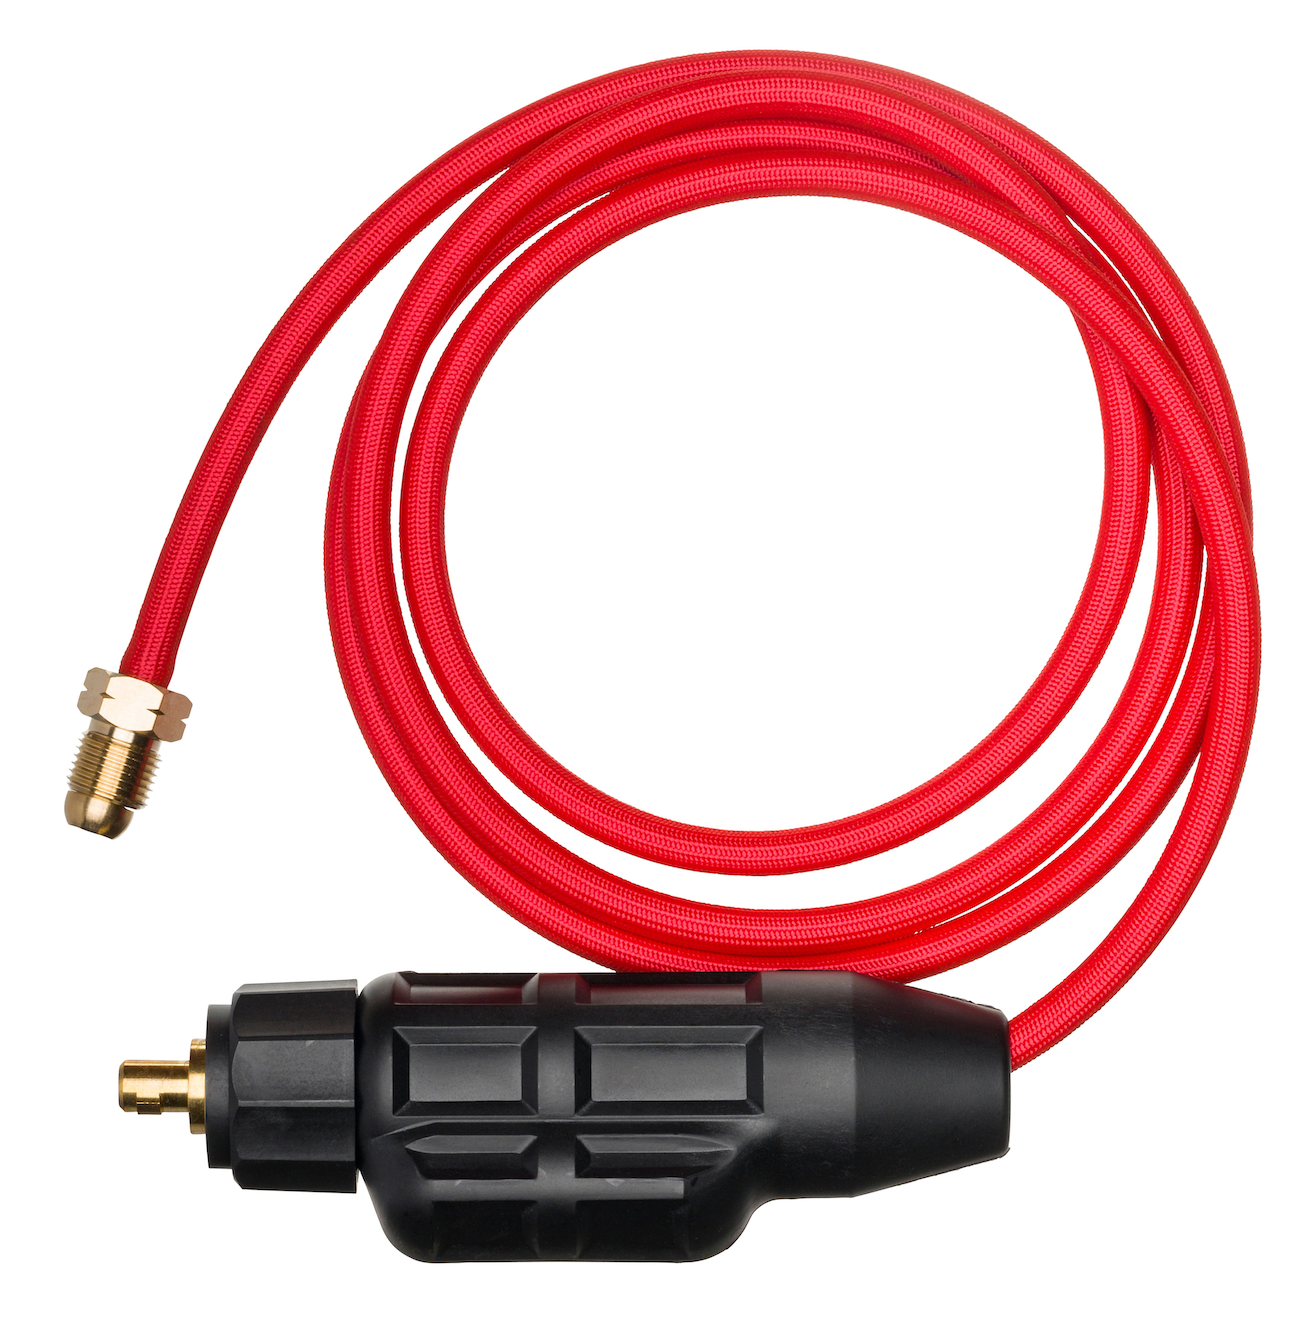 CK Worldwide SLWHAT-35 35mm Water-Cooled SafeLoc Male Dinse Connector